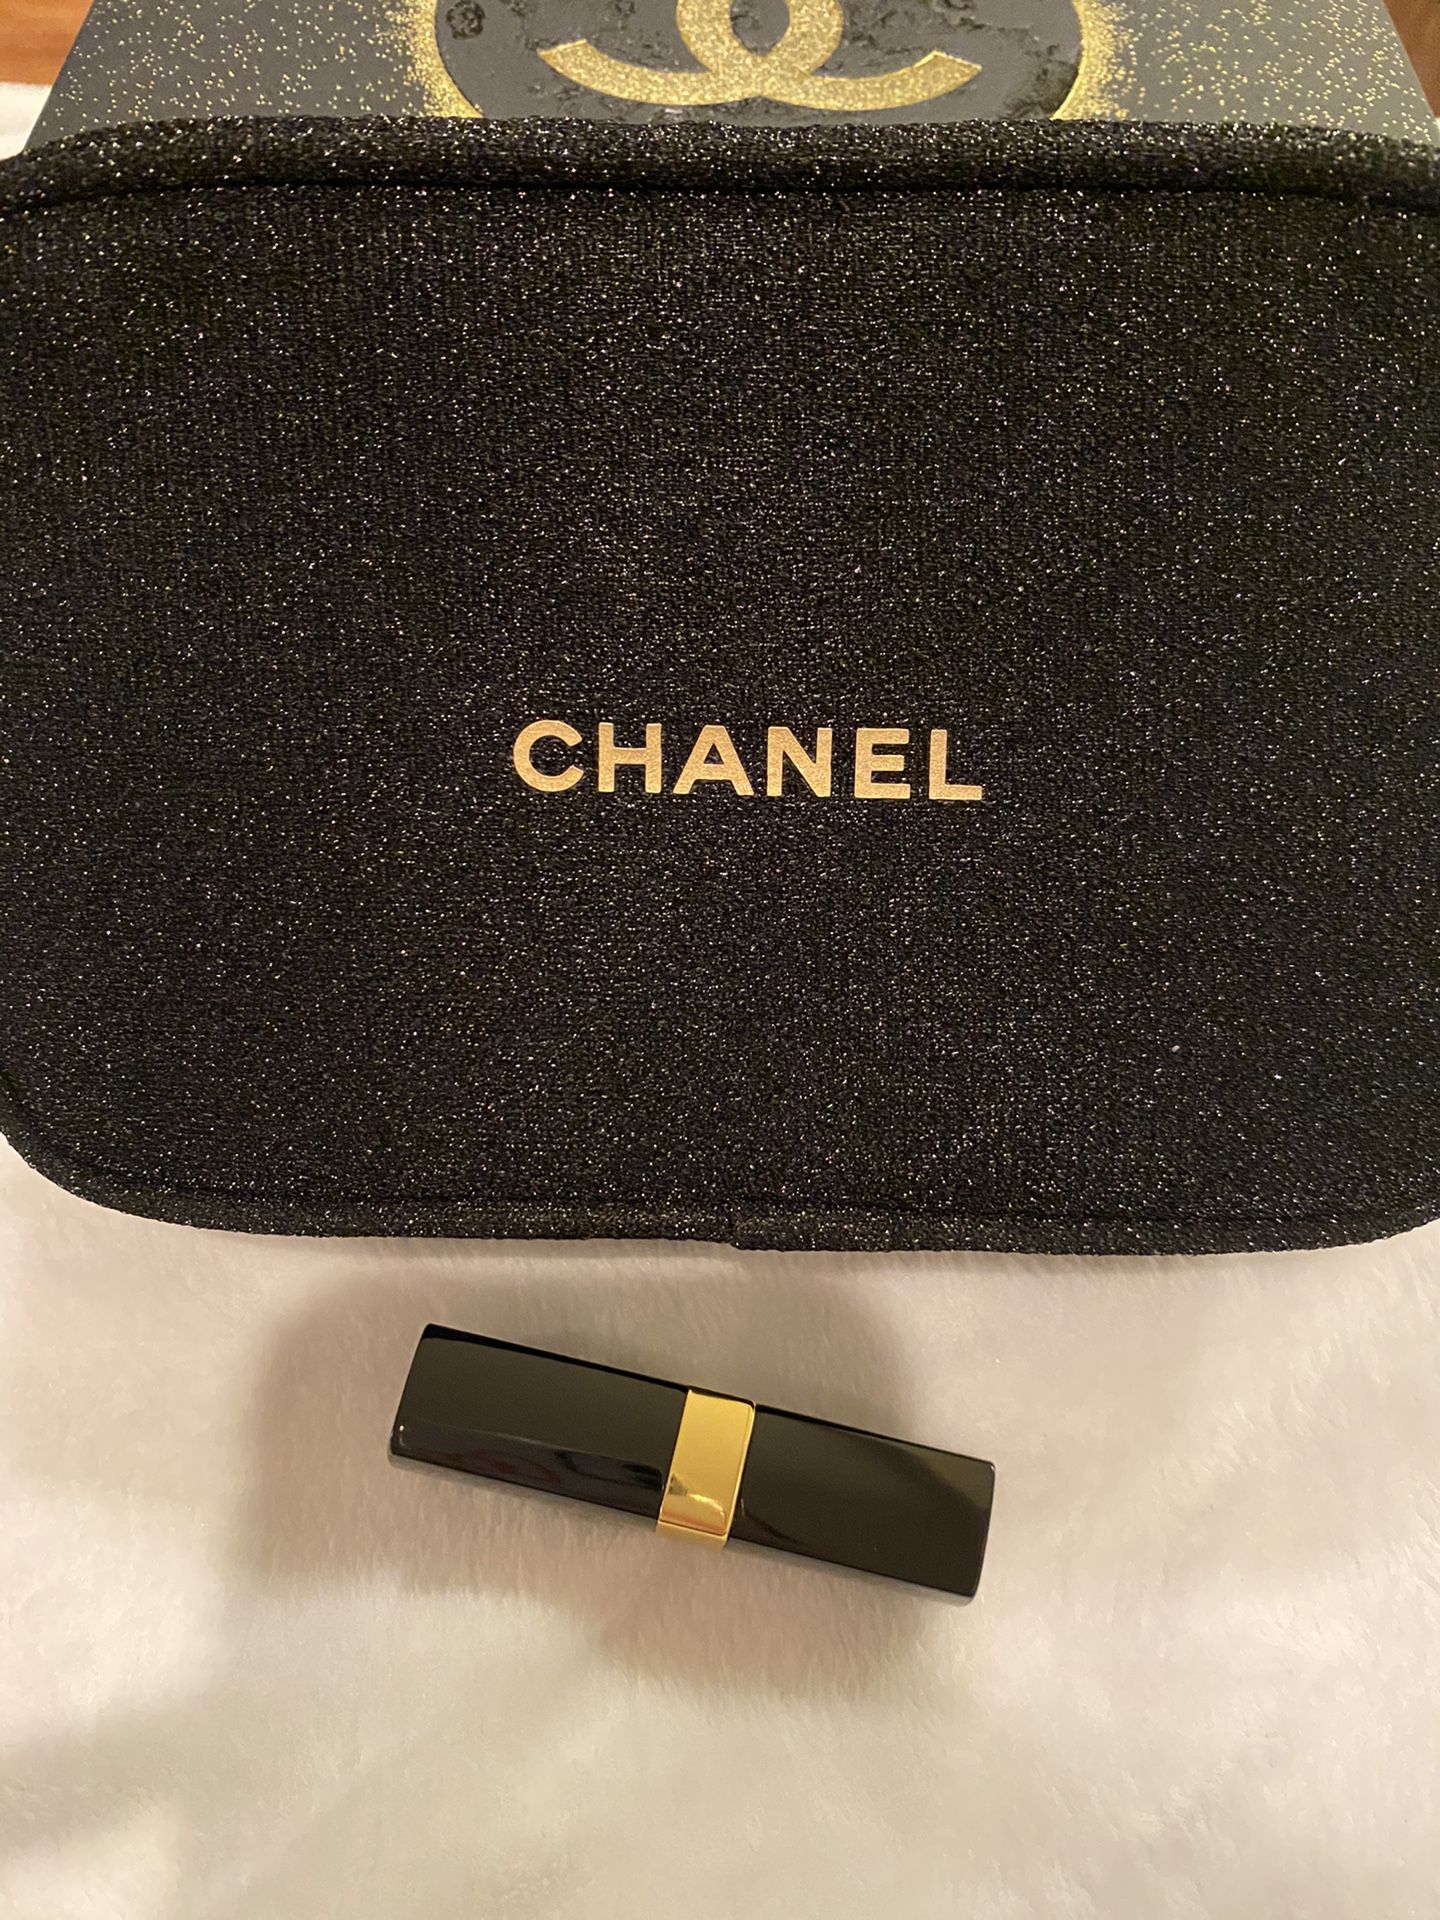 Chanel Bag Pouch Holiday Set